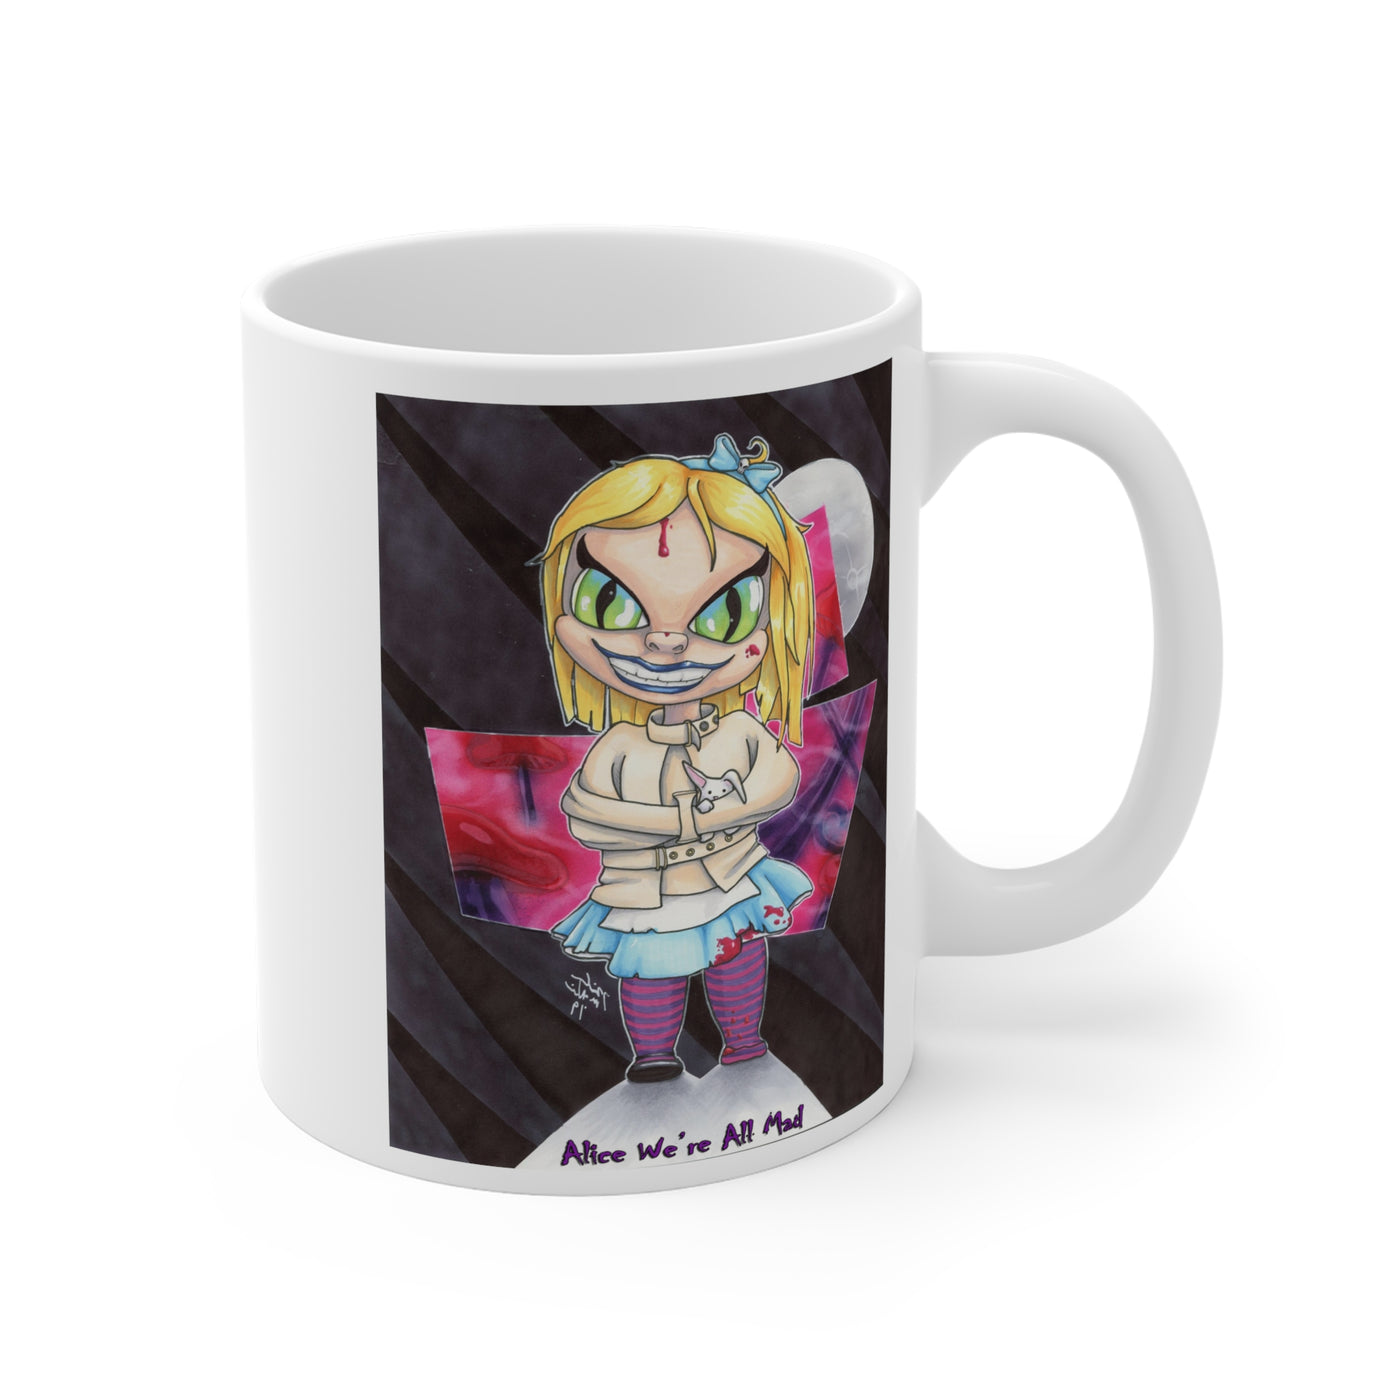 Alice We're all Mad Here Scary Tales Series 2 Mug - Various Sizes 11-20 Oz